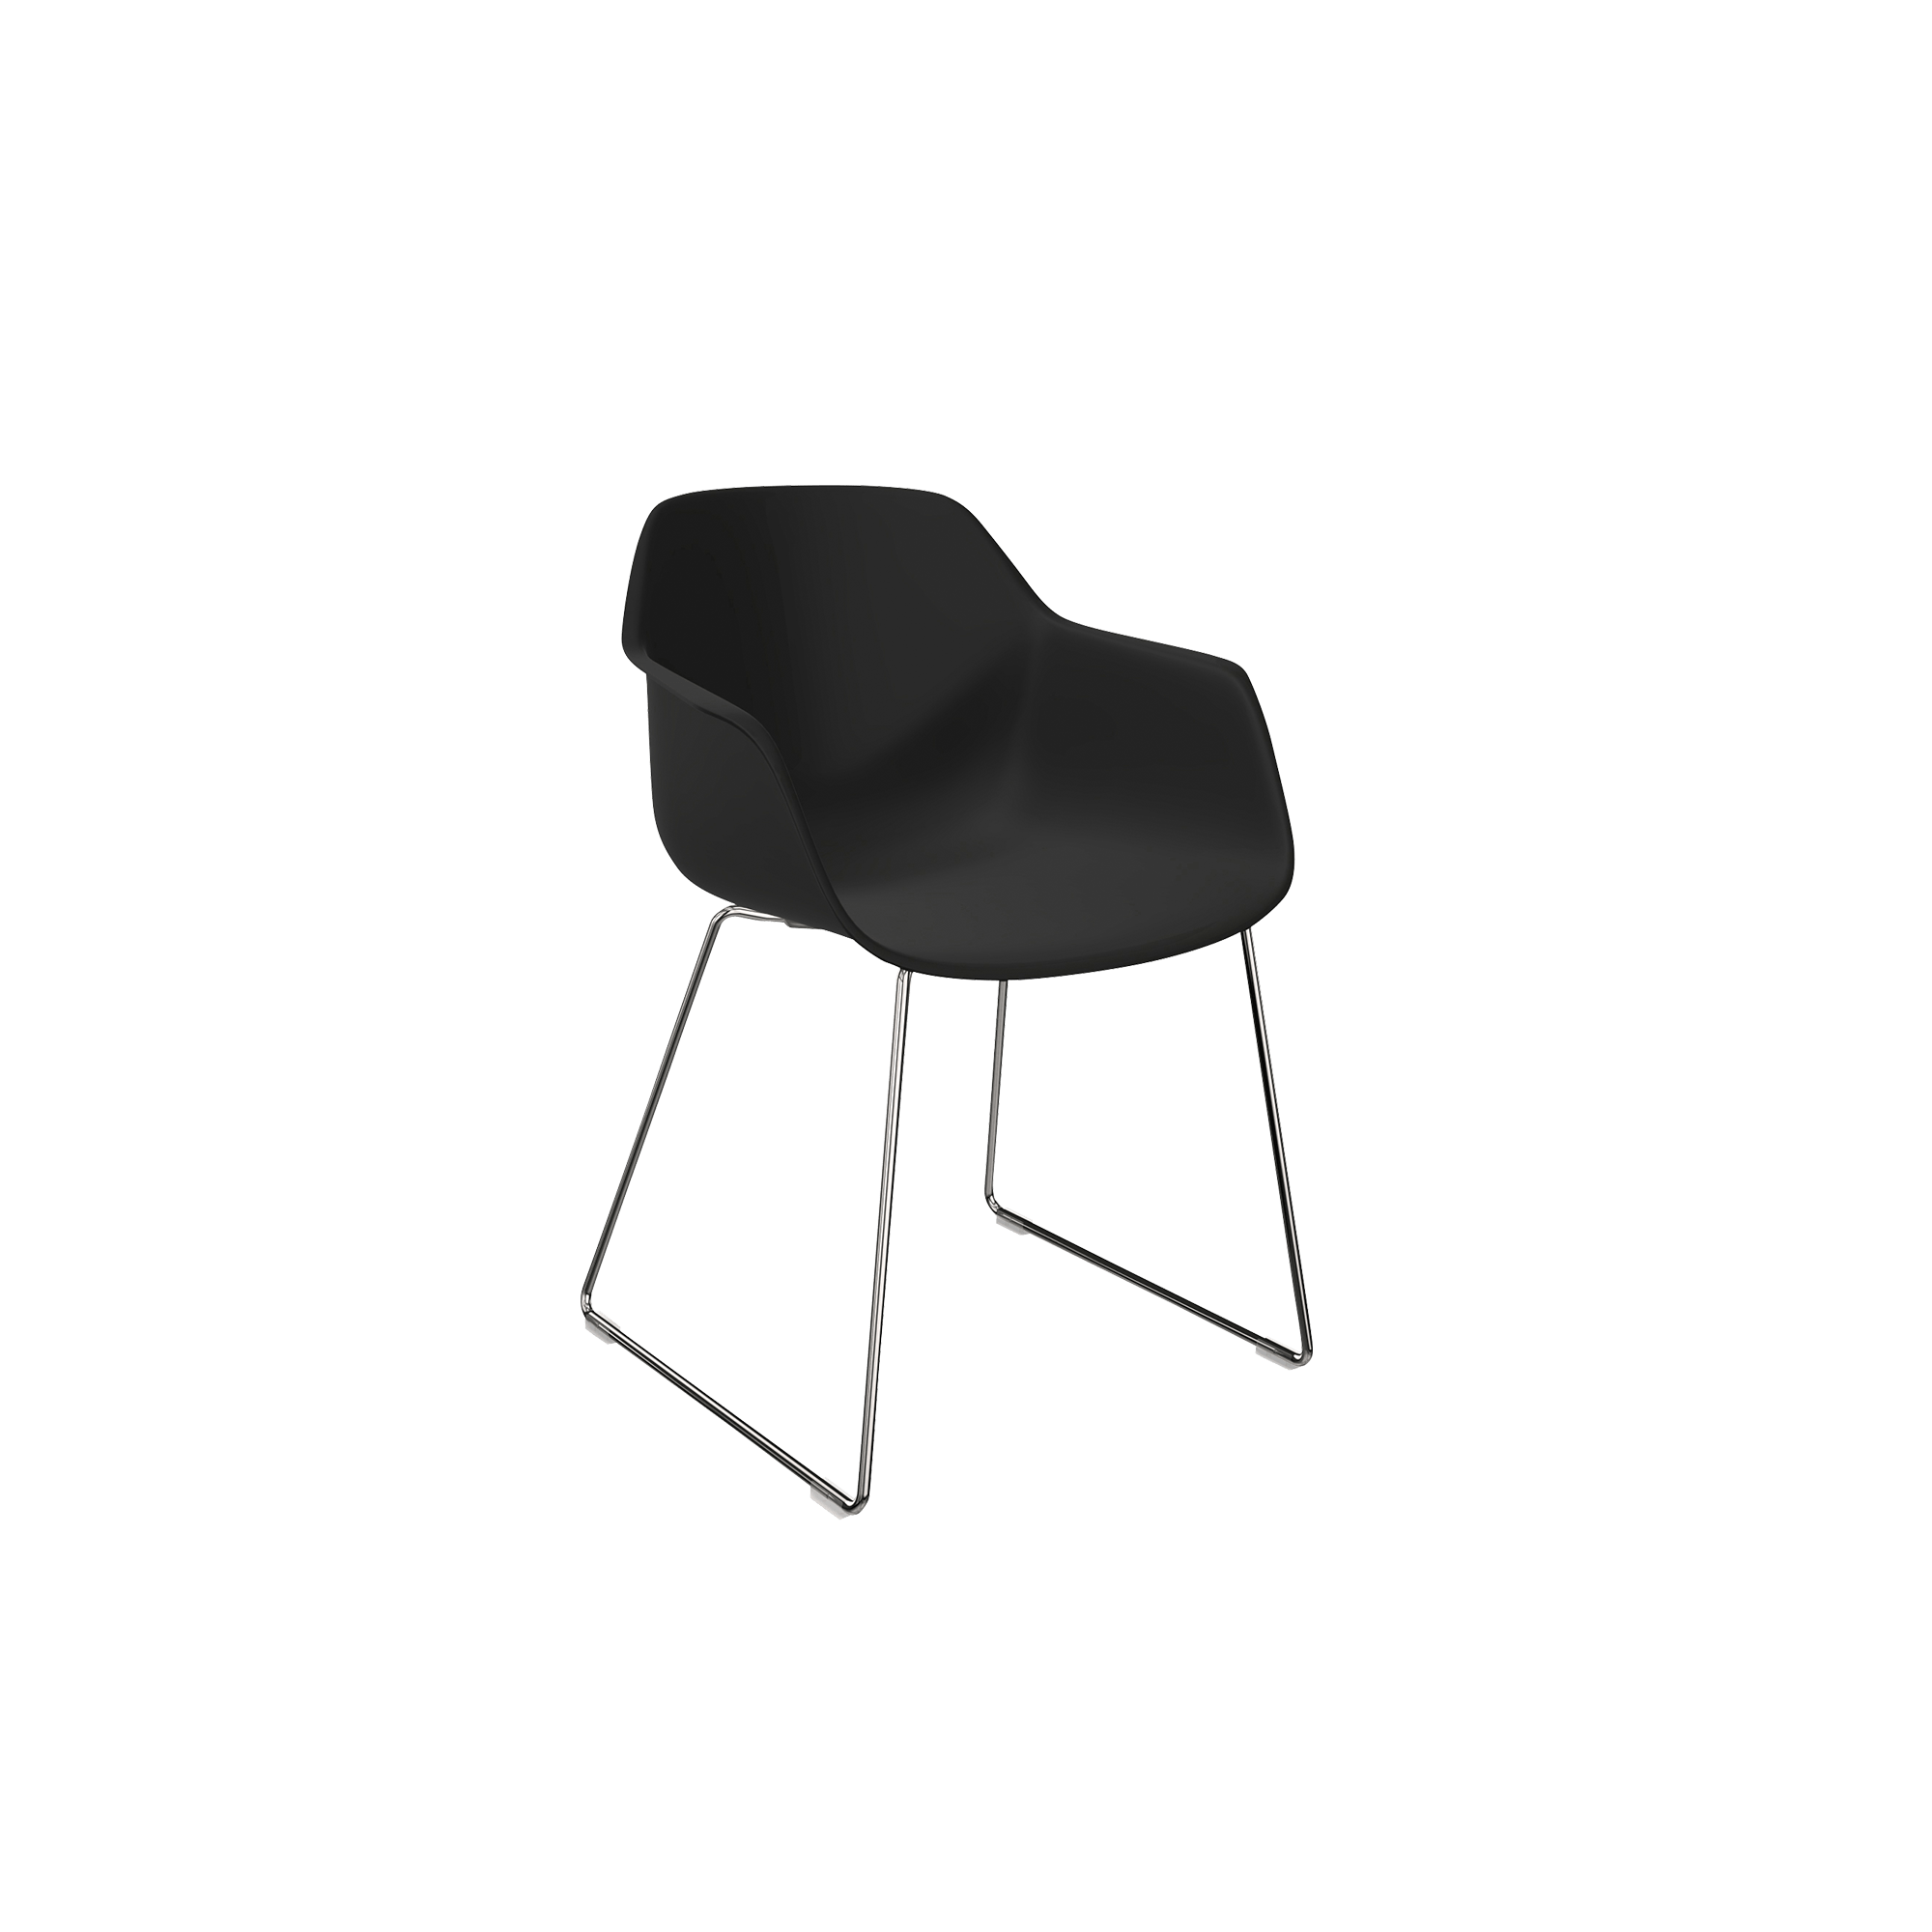 A black chair with 2 legs